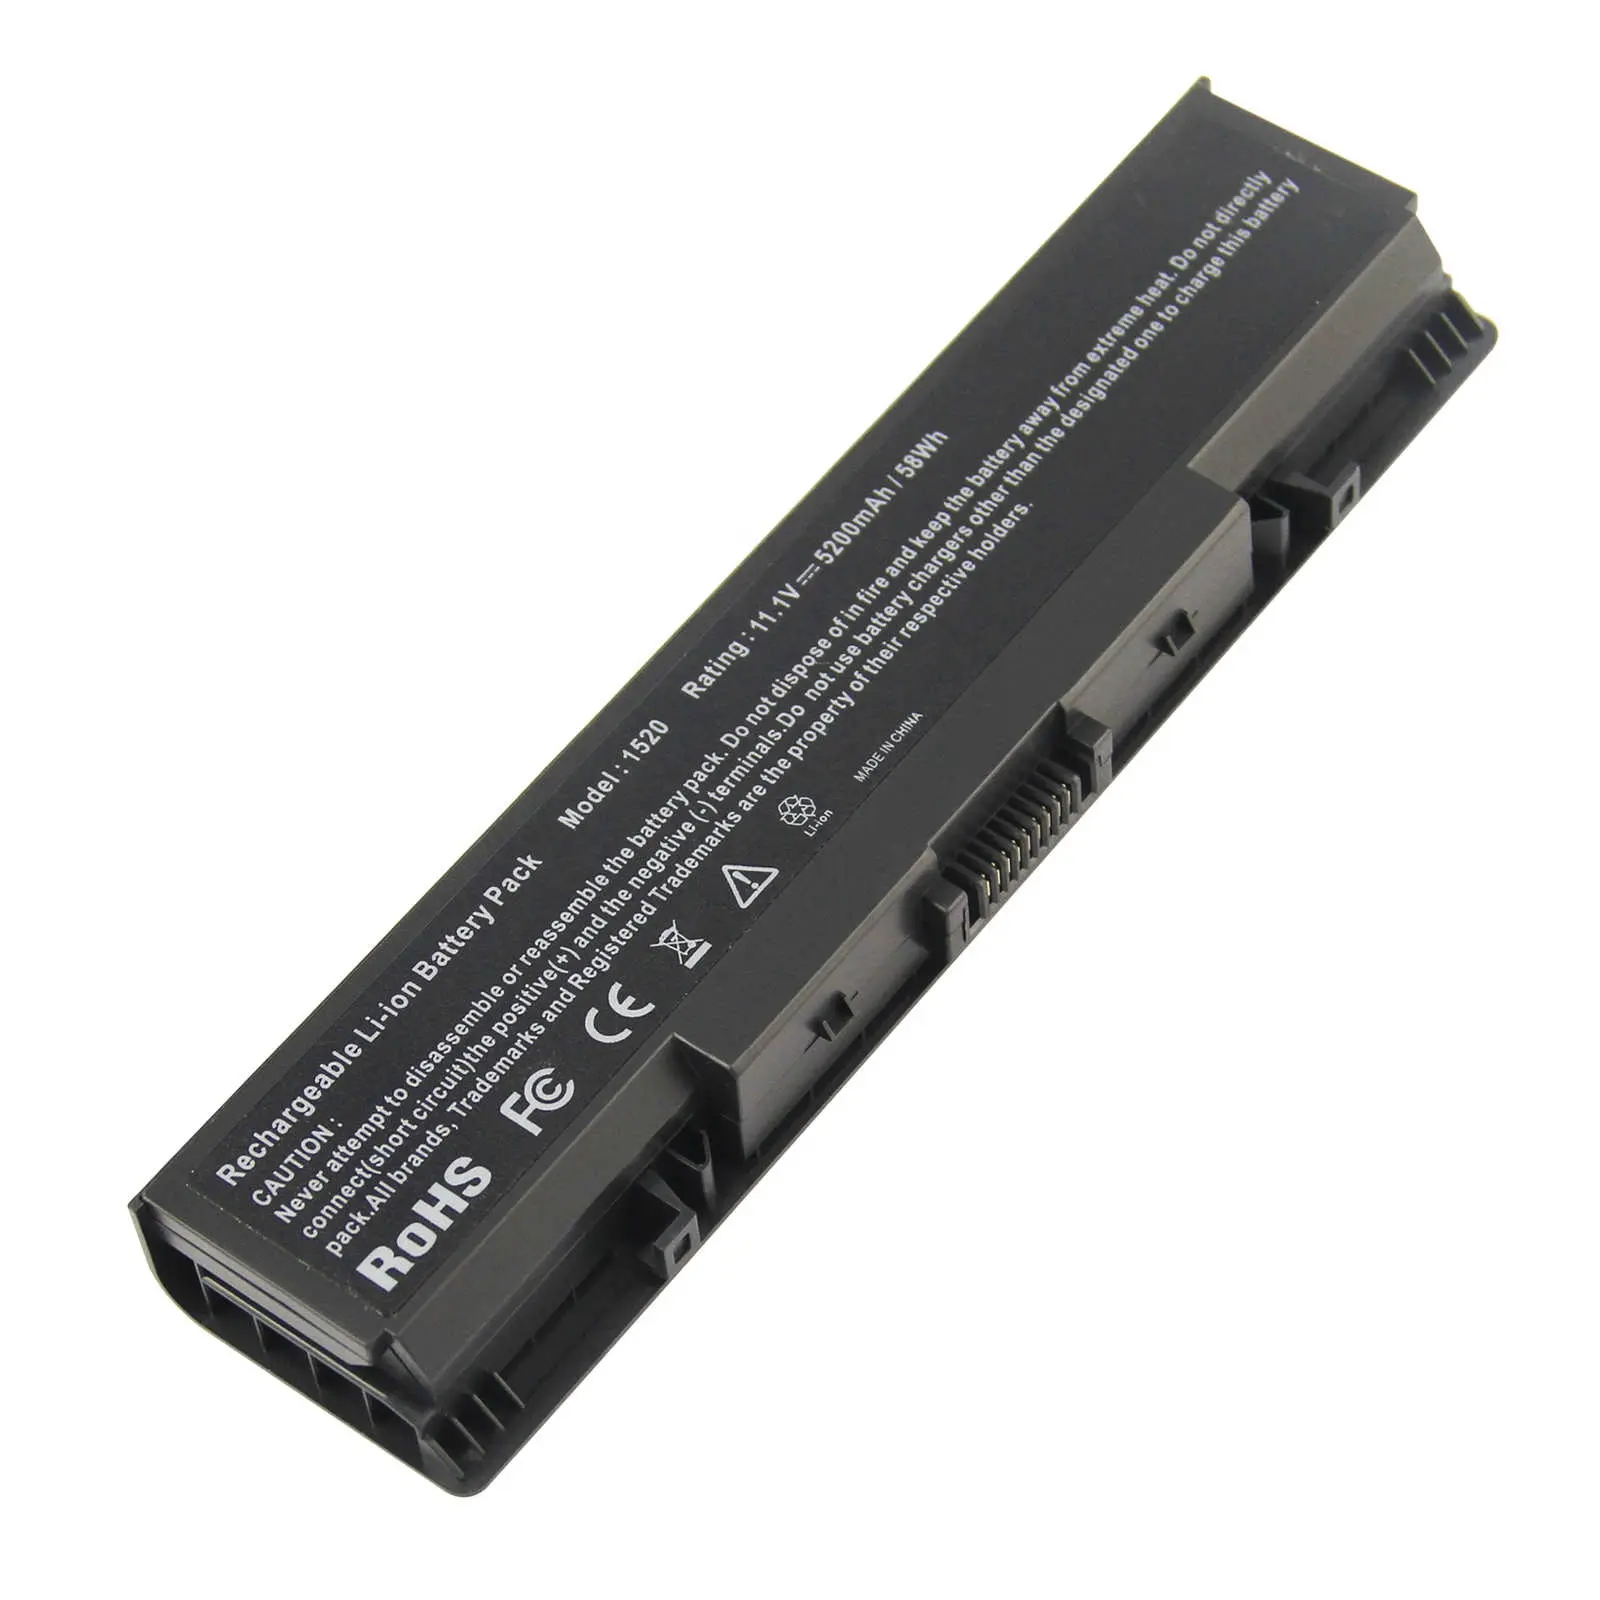 6Cell Battery for Dell Inspiron 1520 1720 1521 1721 Vostro 1500 1700